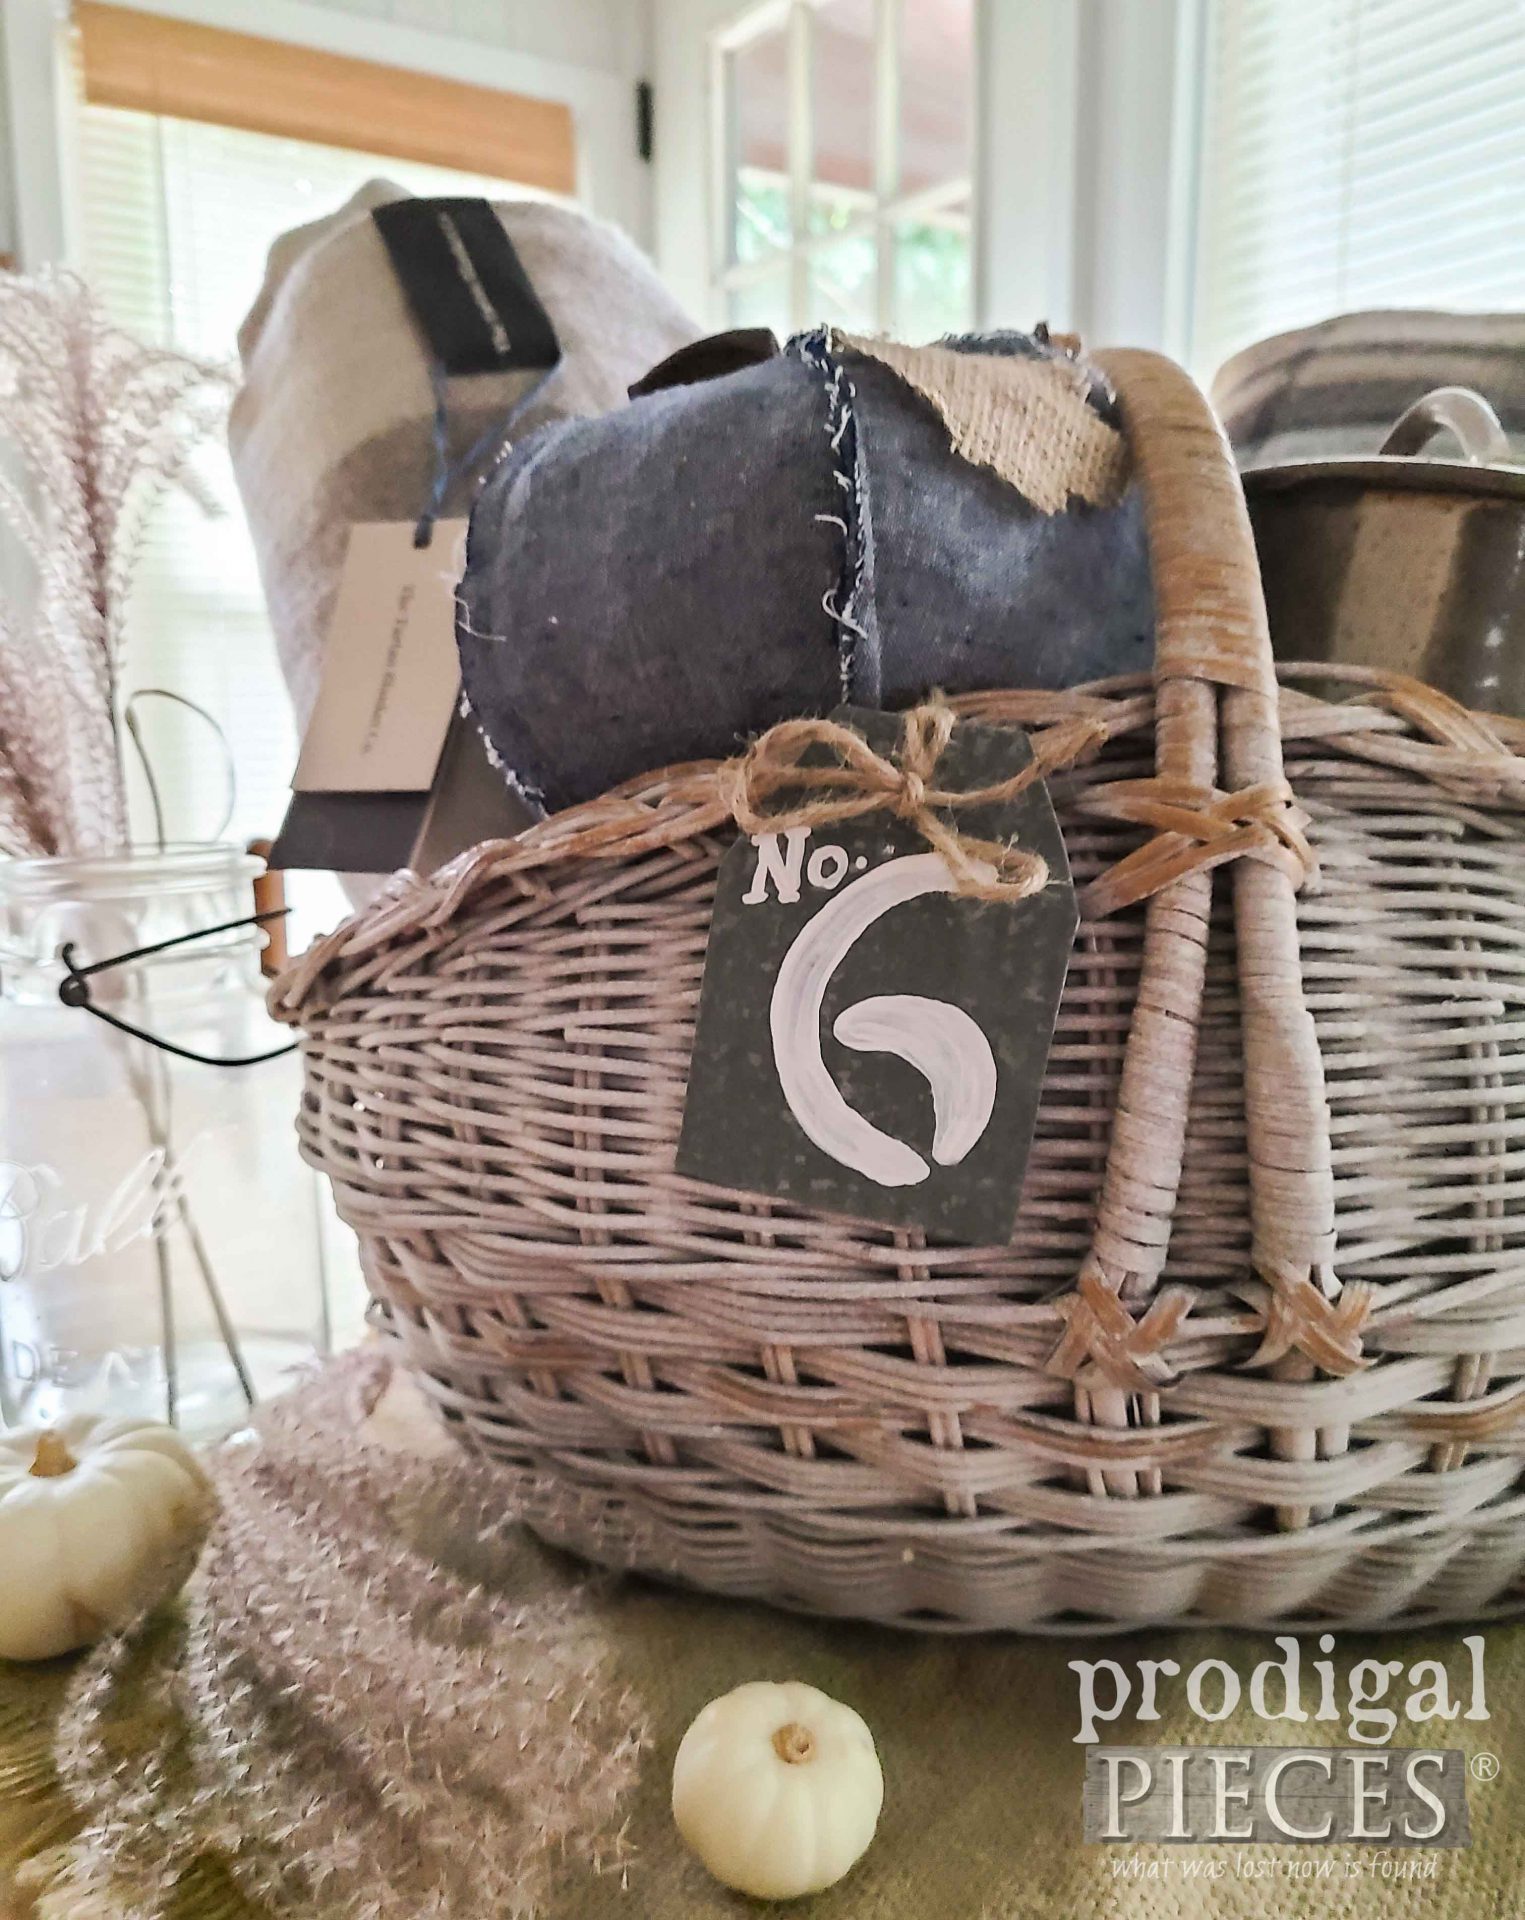 Metal Number Tag on DIY Harvest Gift Basket by Larissa of Prodigal Pieces | prodigalpieces.com #prodigalpieces #harvest #diy #home